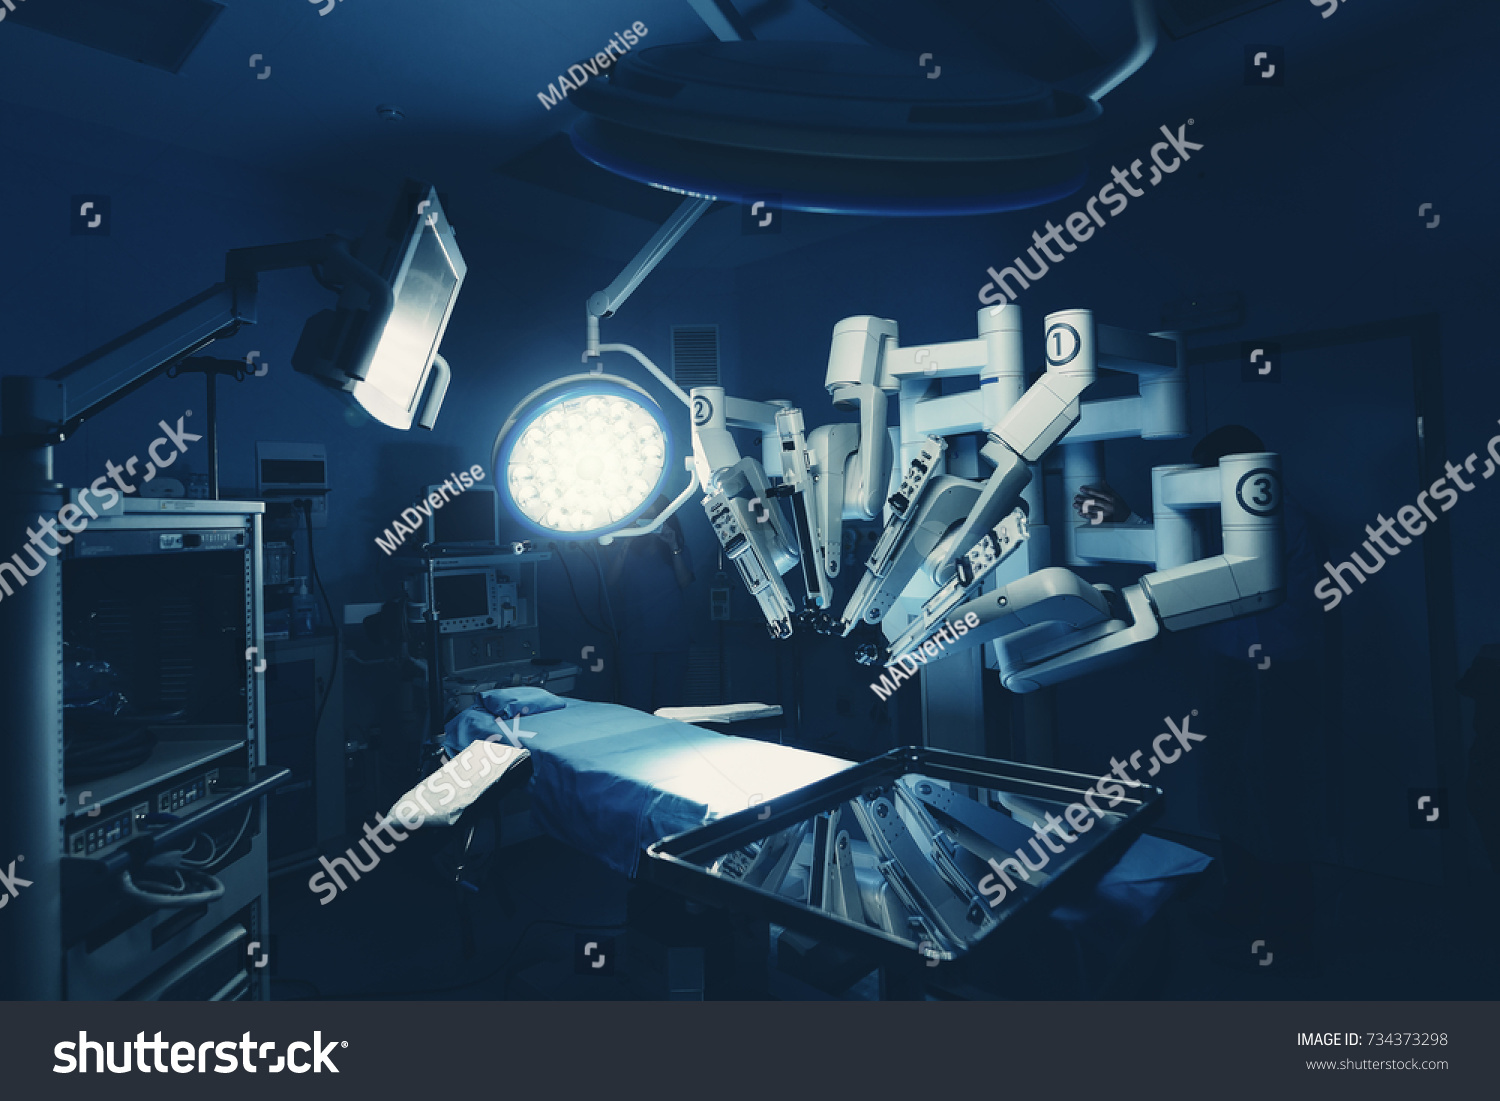 Surgical room in hospital with robotic technology equipment, machine arm surgeon in futuristic operation room. Minimal invasive surgical inoovation, medical robot surgery with 3D view endoscopy #734373298